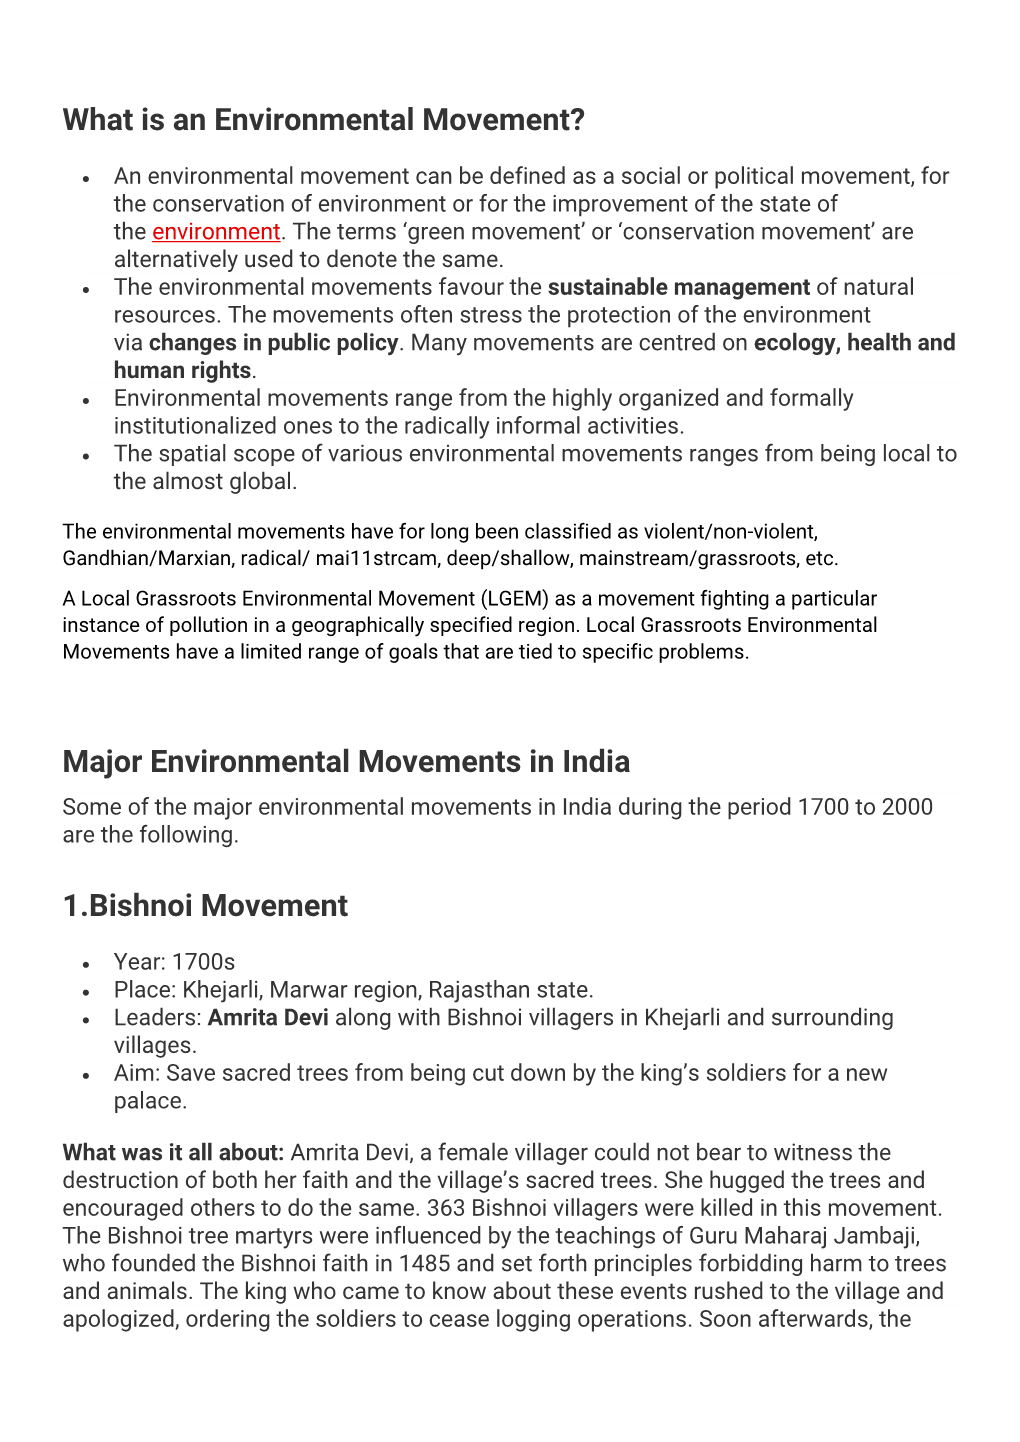 What Is an Environmental Movement? Major Environmental Movements In